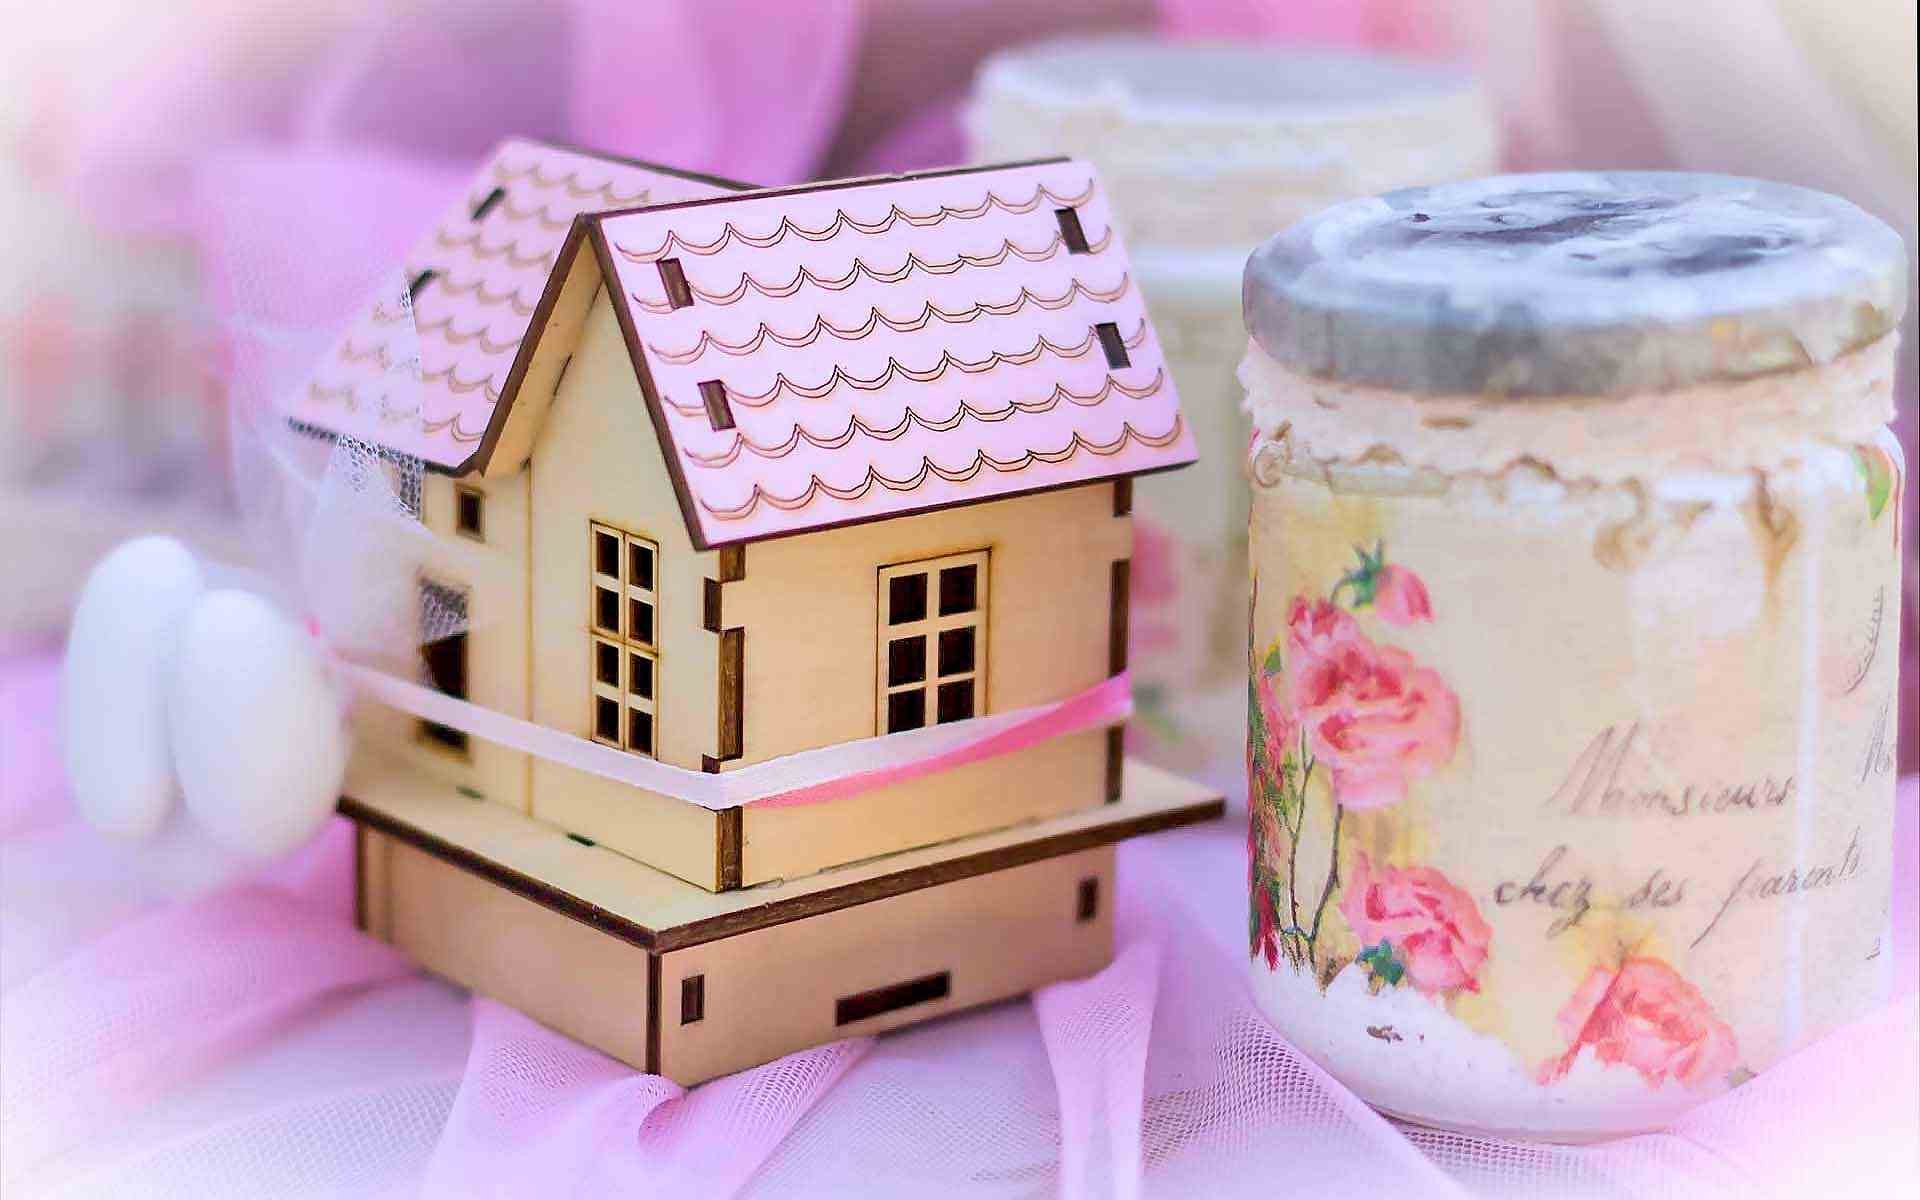 Wooden-House-And-Candle-Baptismal-Favour-In-Shades-Of-Blush